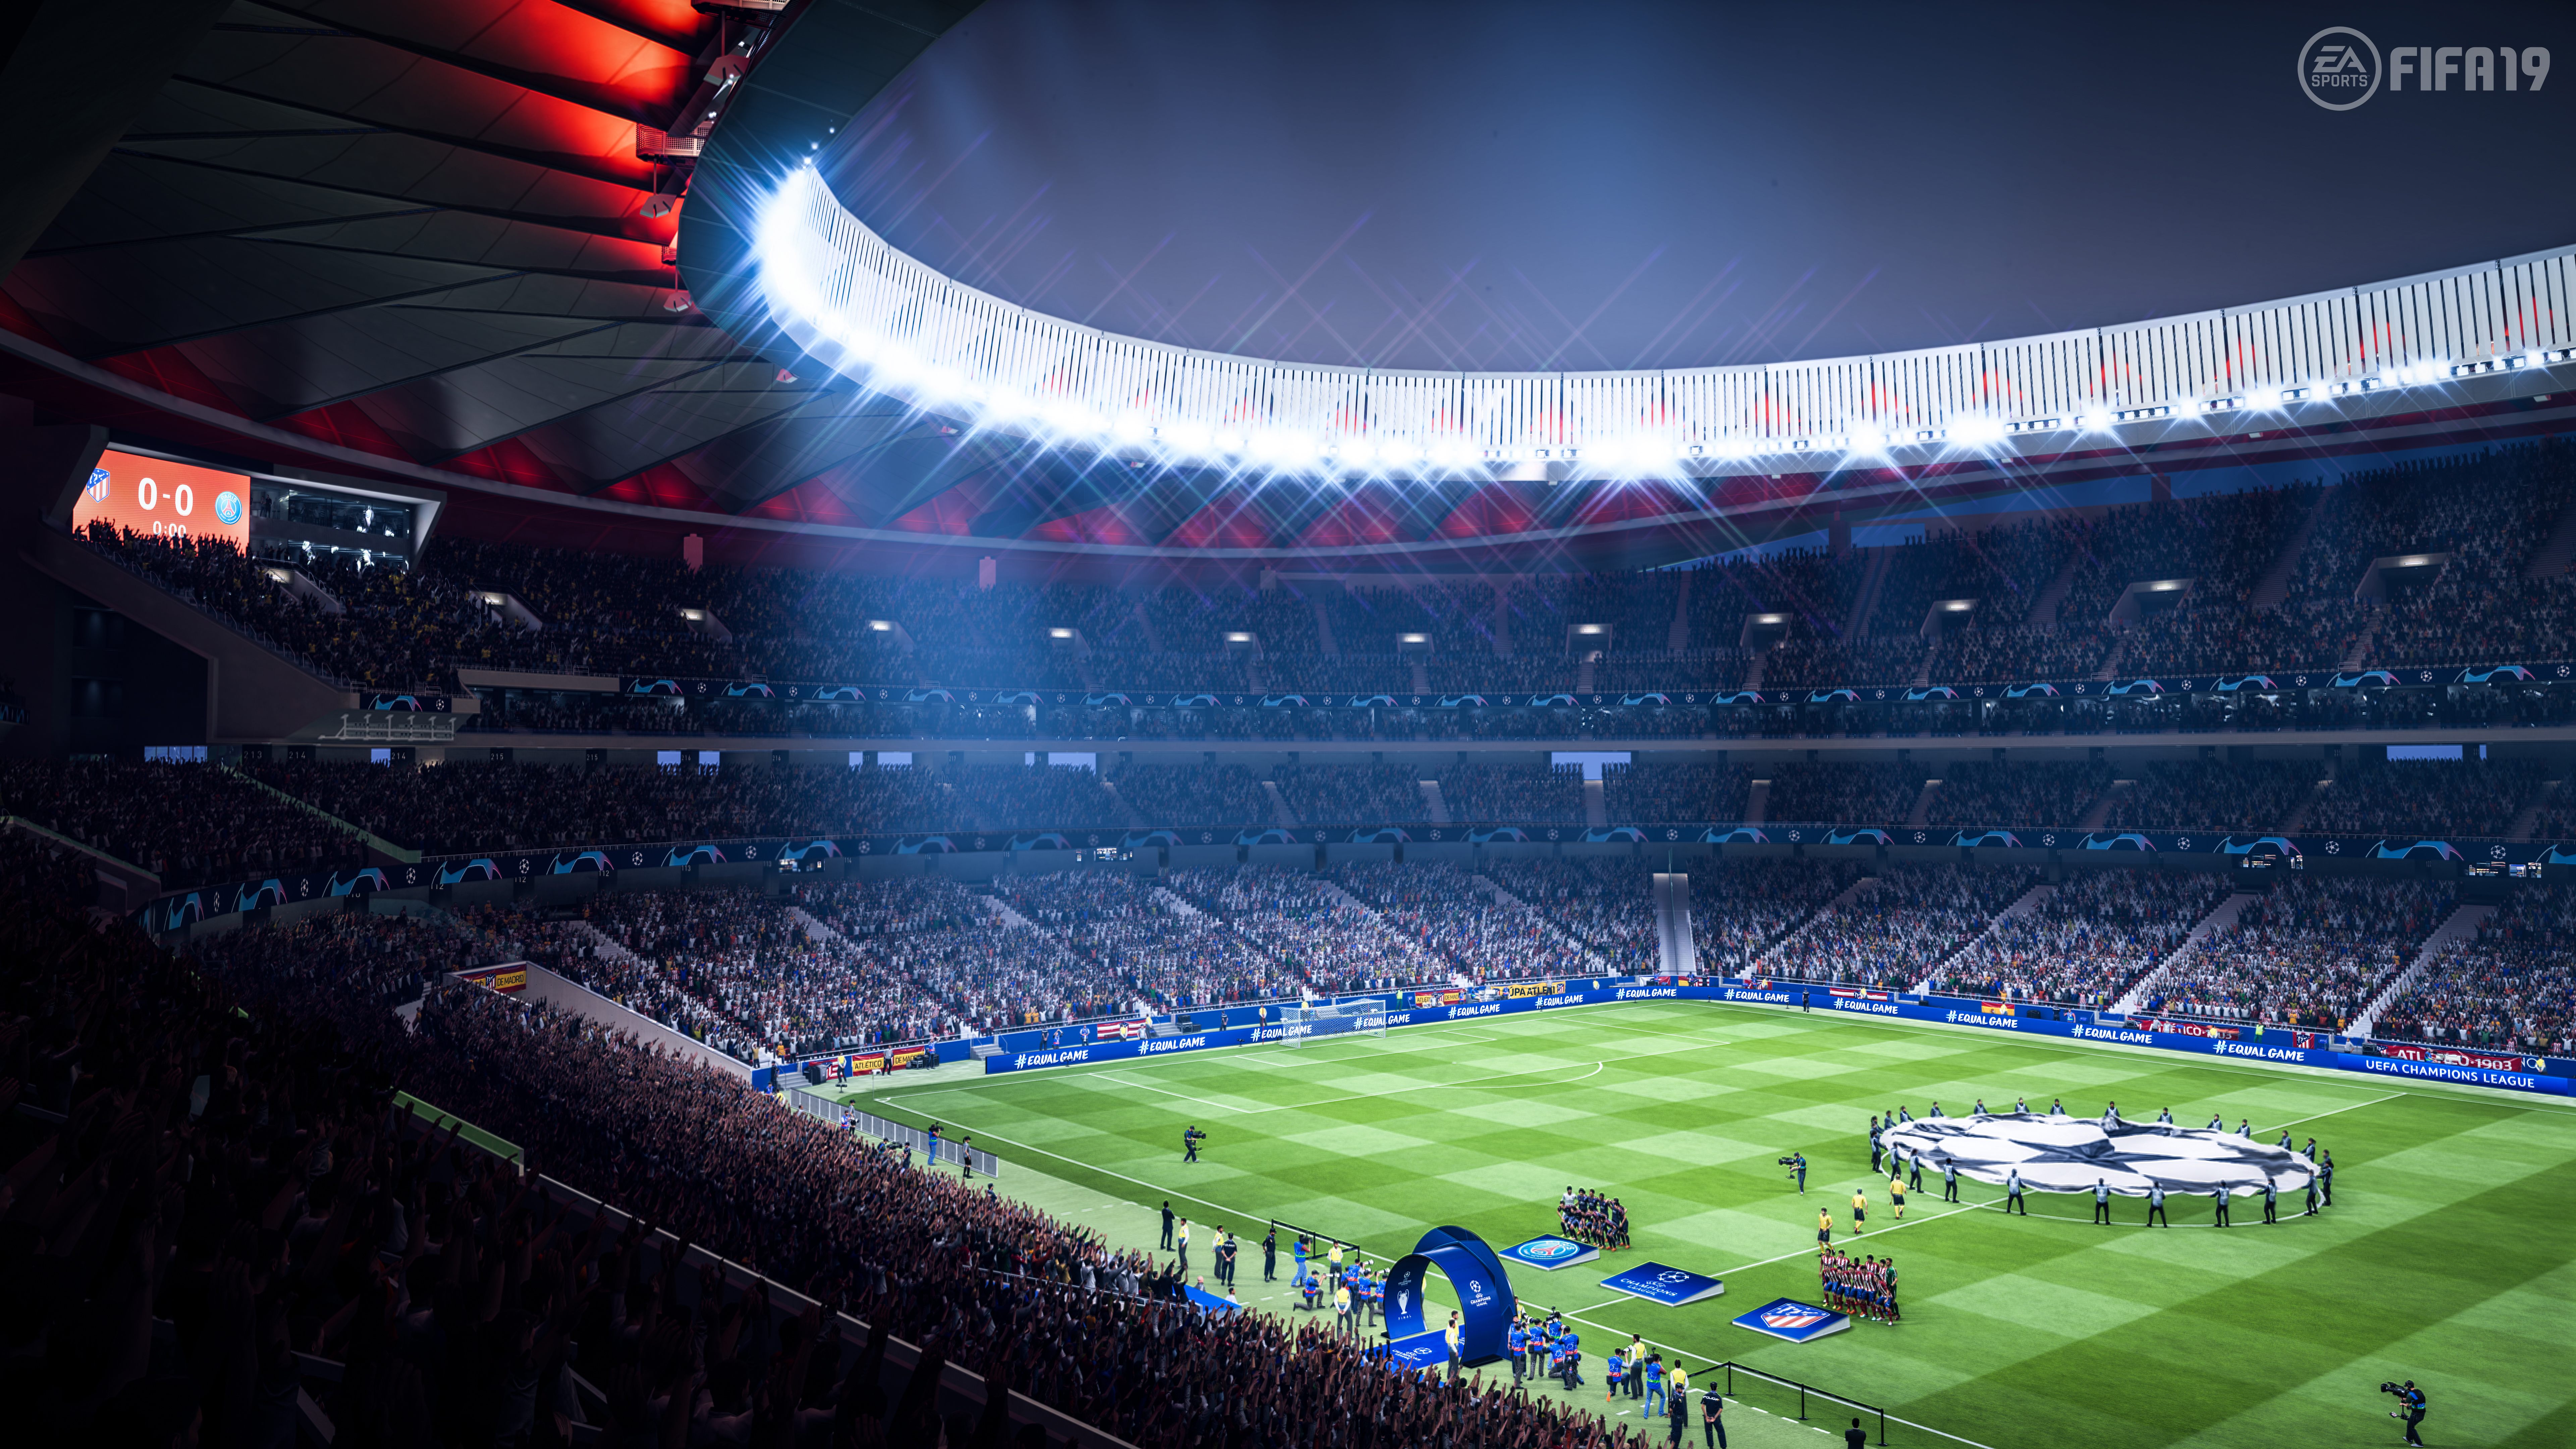 FIFA 19 PS4 Preview